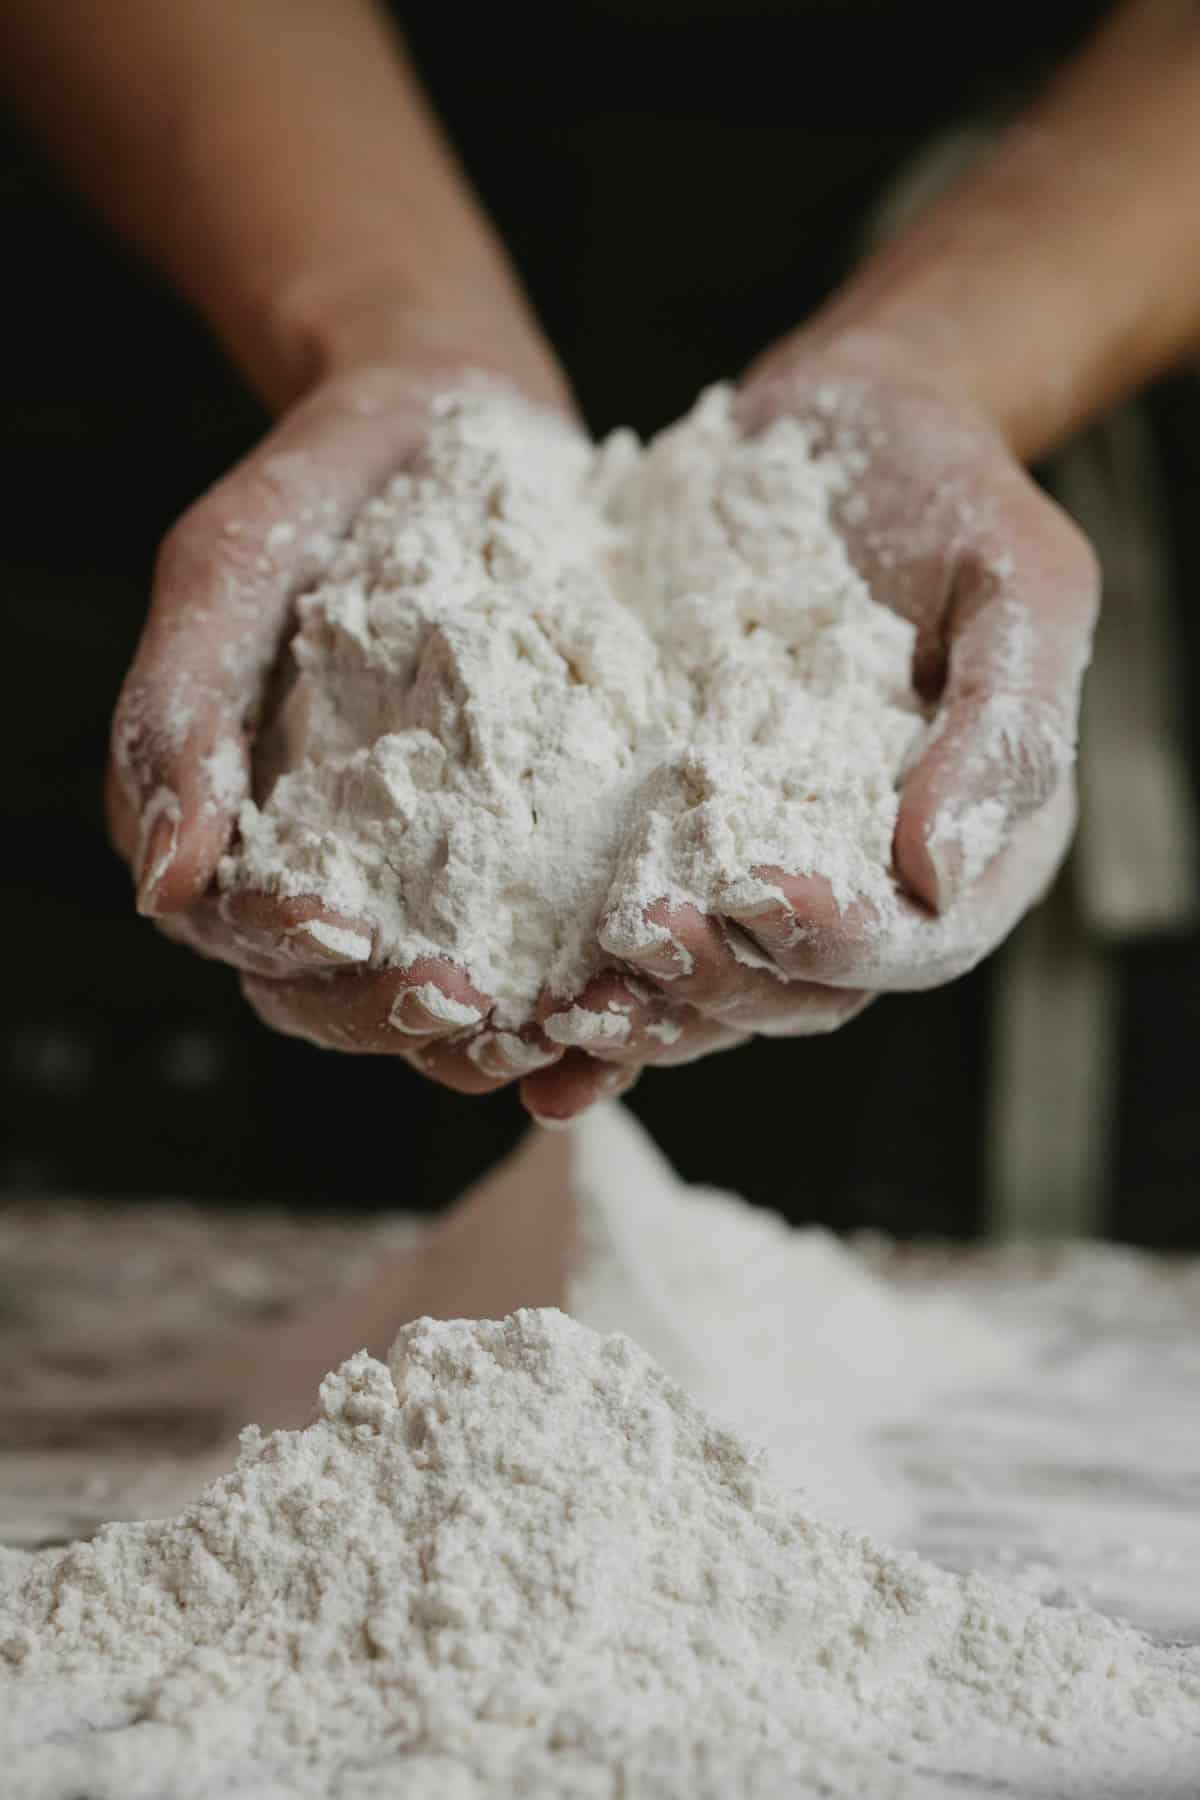 Two hands holding self raising flour over a bench.